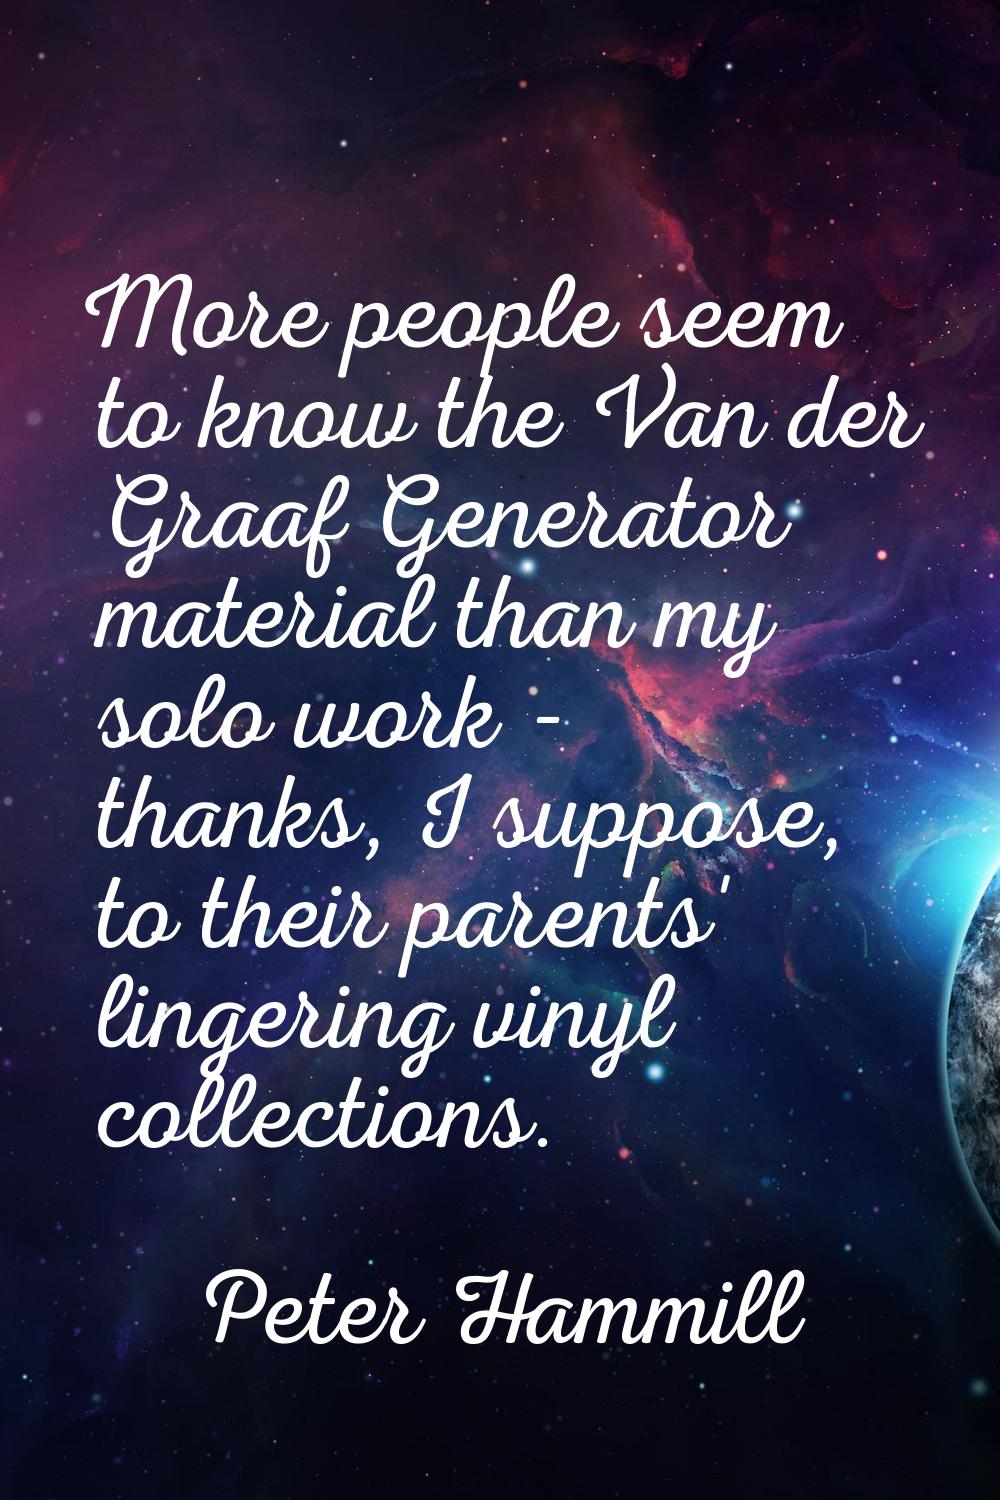 More people seem to know the Van der Graaf Generator material than my solo work - thanks, I suppose